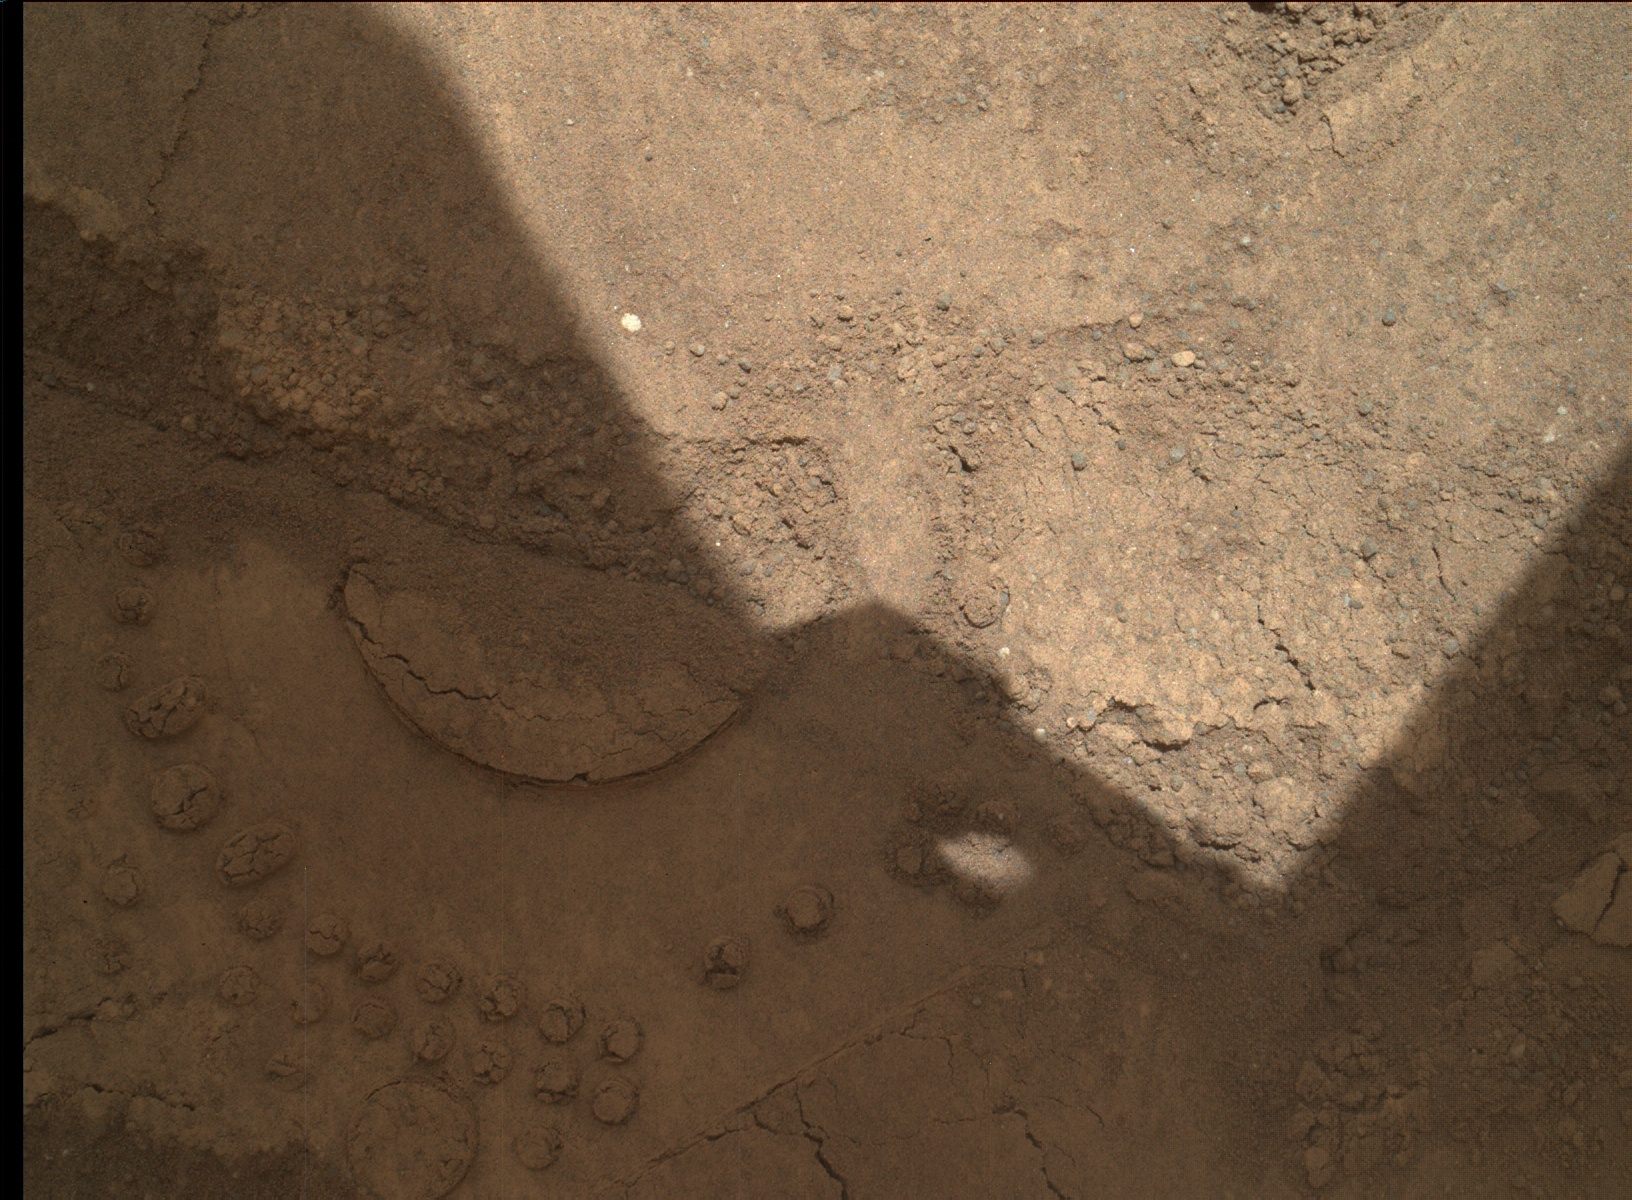 Nasa's Mars rover Curiosity acquired this image using its Mars Hand Lens Imager (MAHLI) on Sol 89